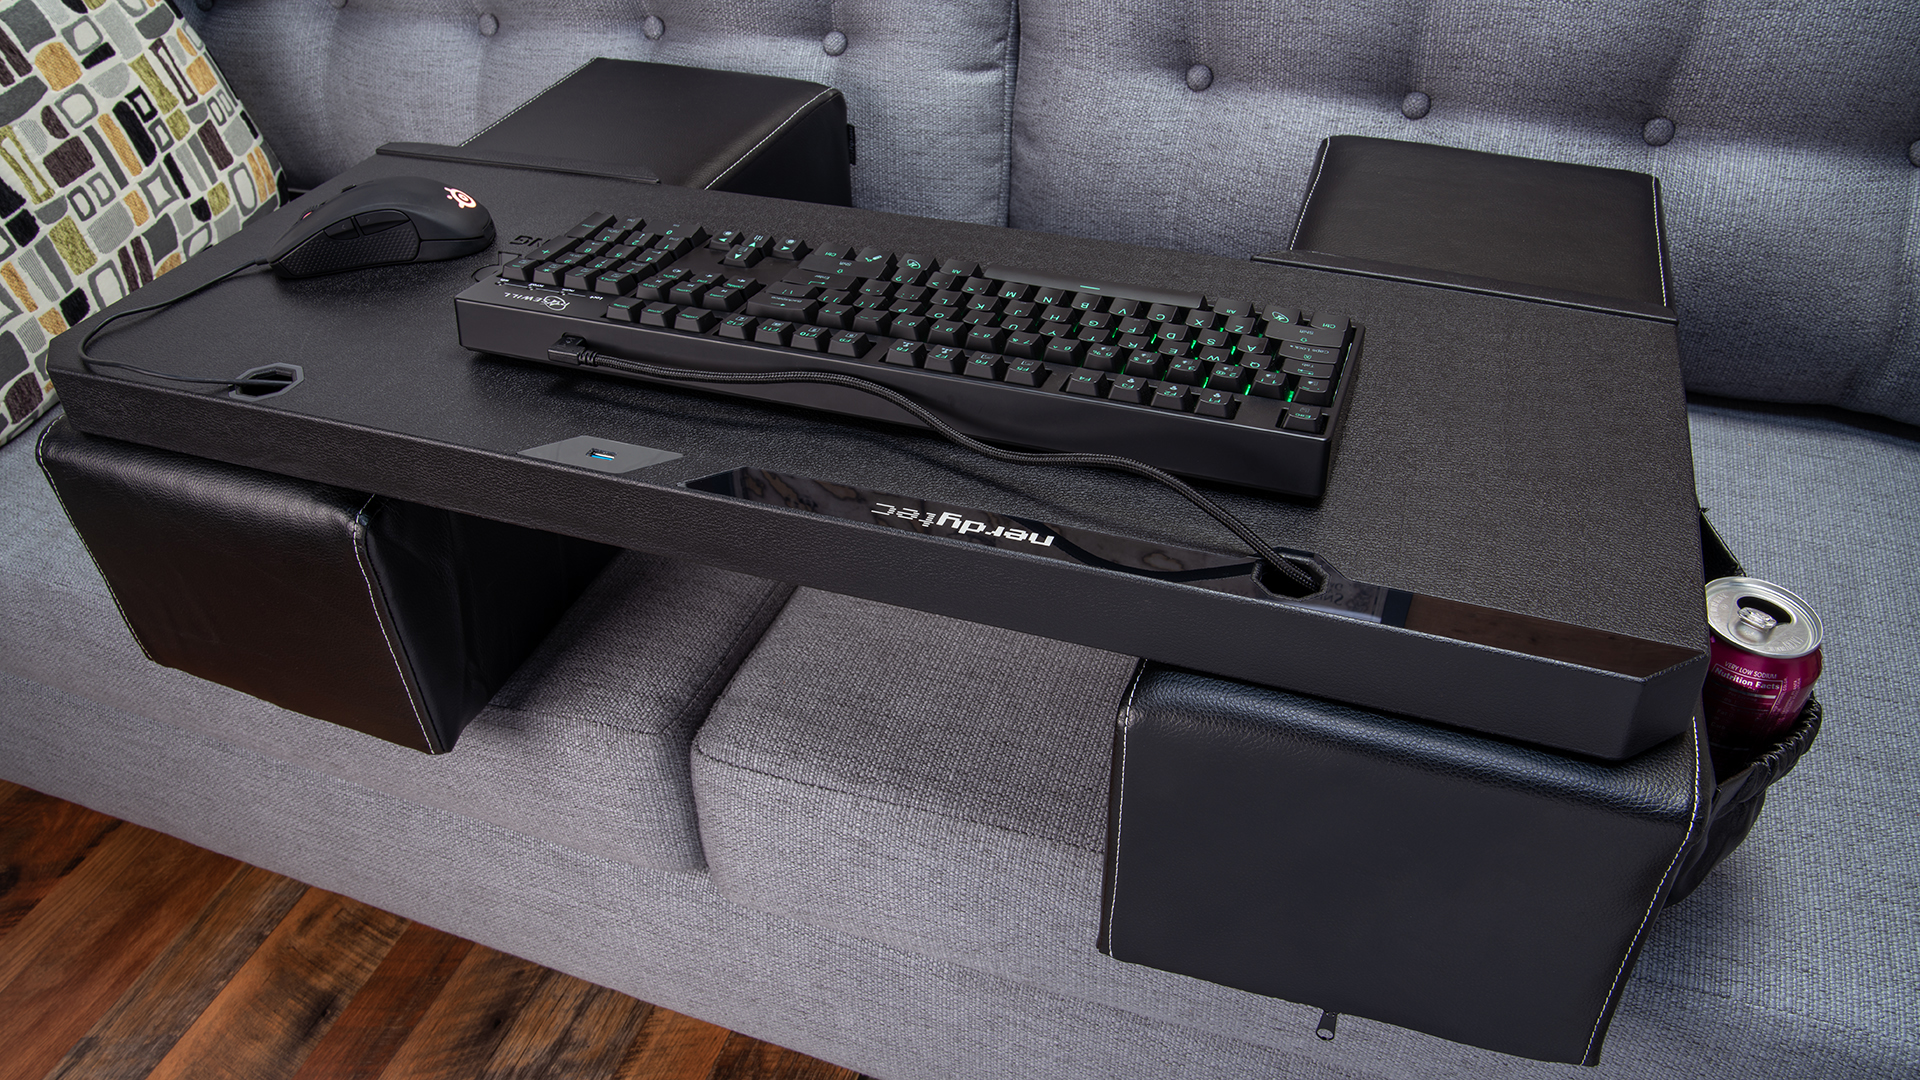 organ Ekspression Skæbne The Couchmaster Cycon delivers uncompromising PC gaming with a lap desk,  from the comfort of your sofa - Newegg Insider